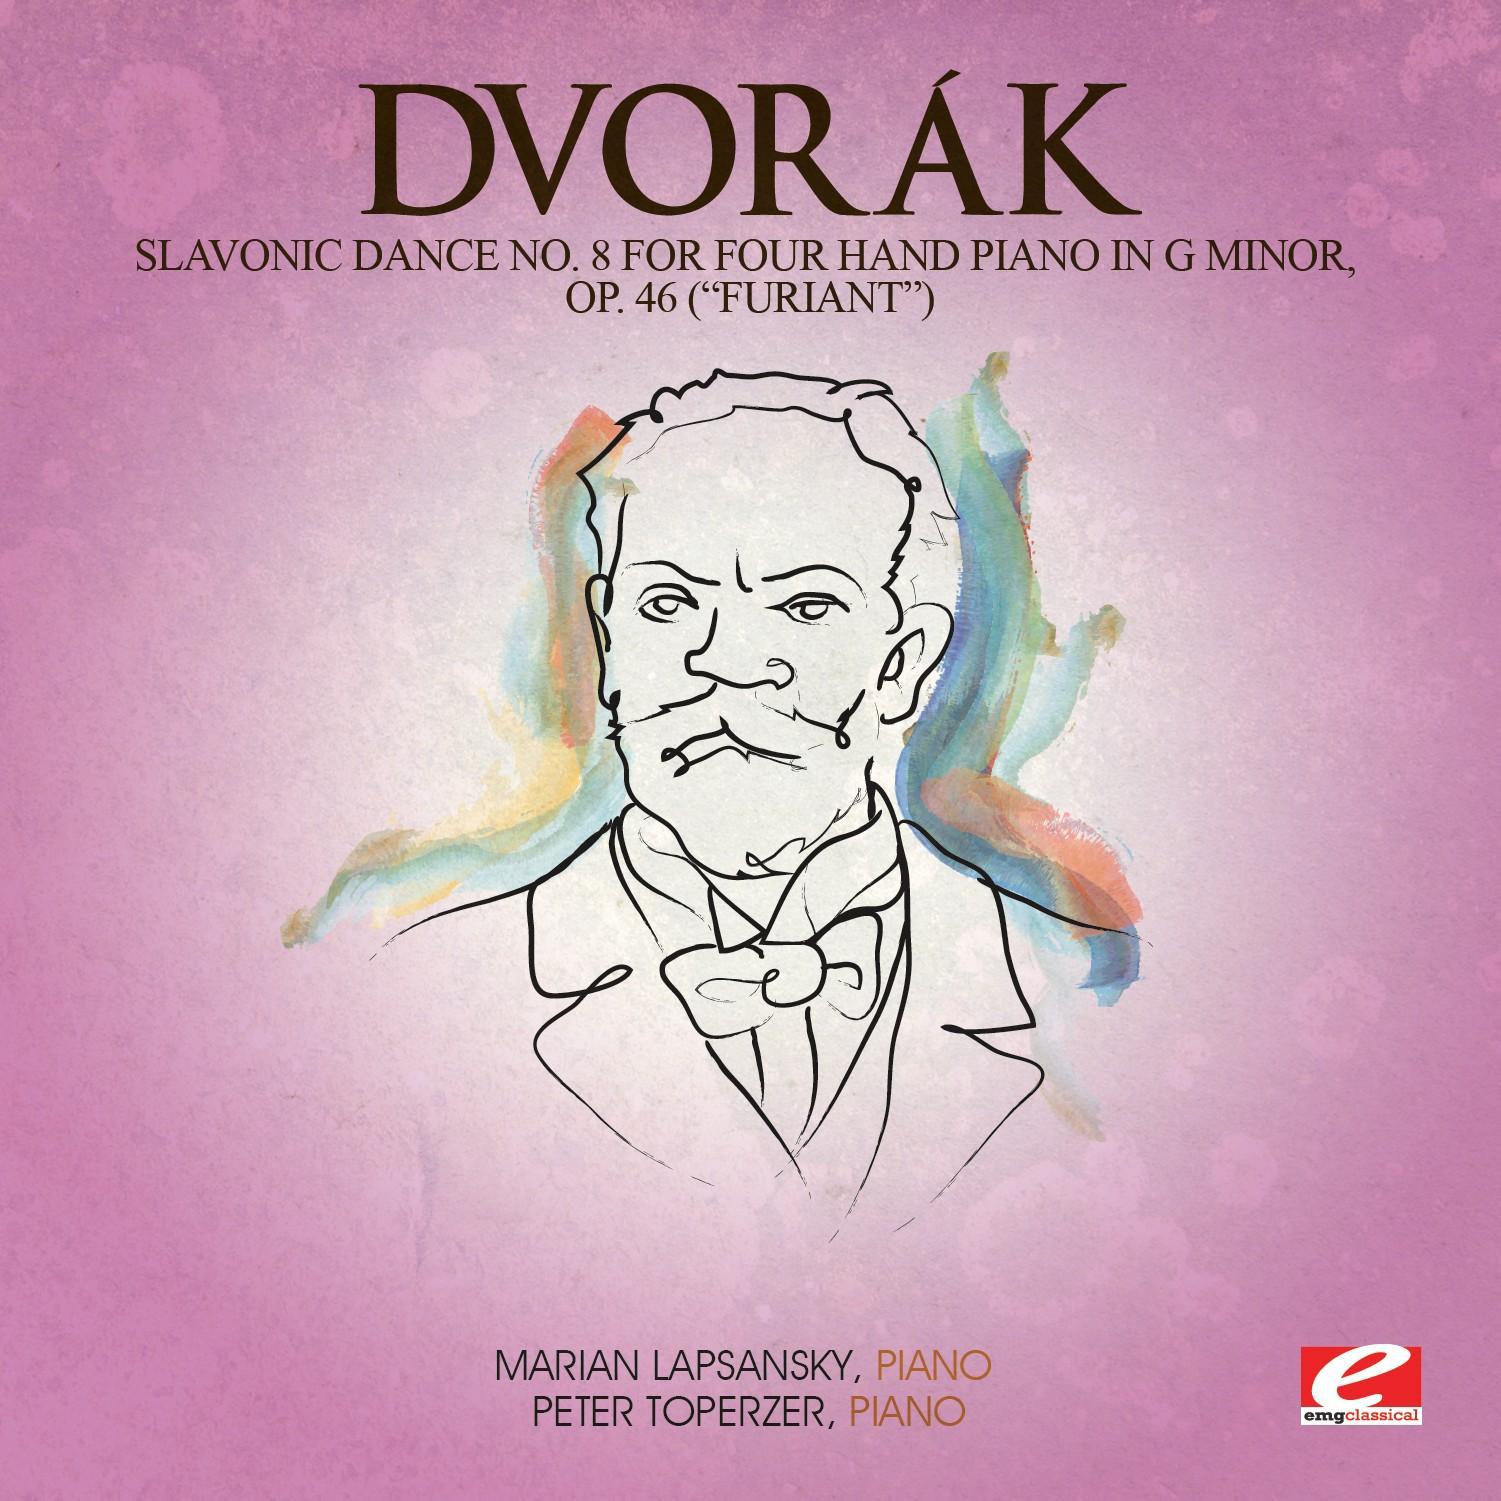 Dvorák: Slavonic Dance No. 8 for Four Hand Piano in G Minor, Op. 46 (Furiant) [Digitally Remastered]